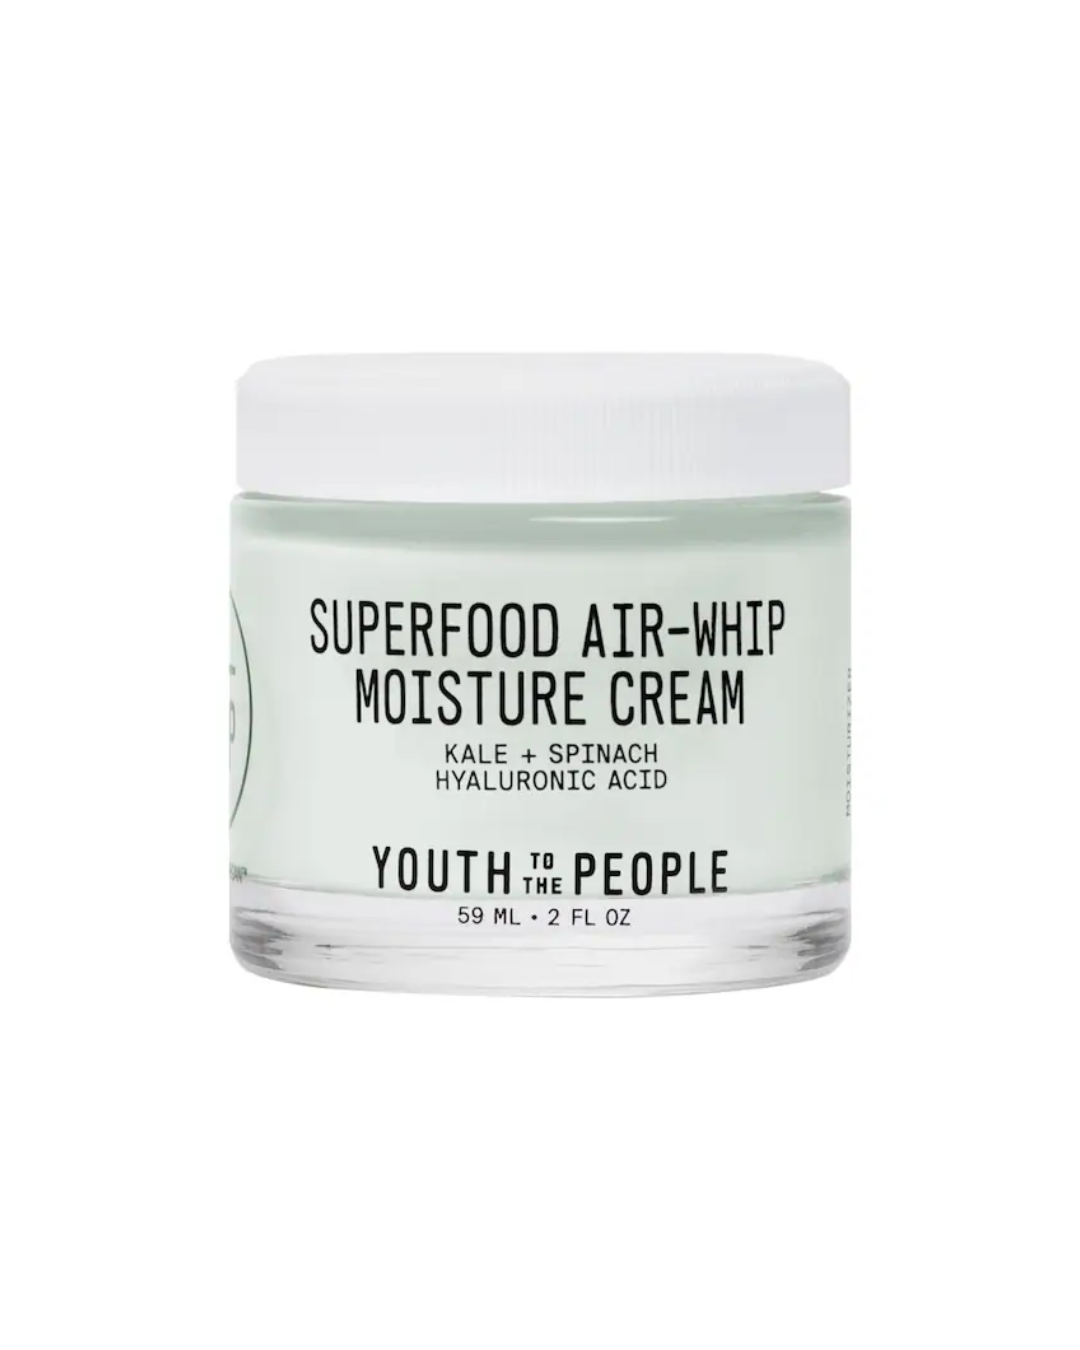 Youth To the People Superfood Air-Whip Lightweight Face Moisturizer with Hyaluronic Acid